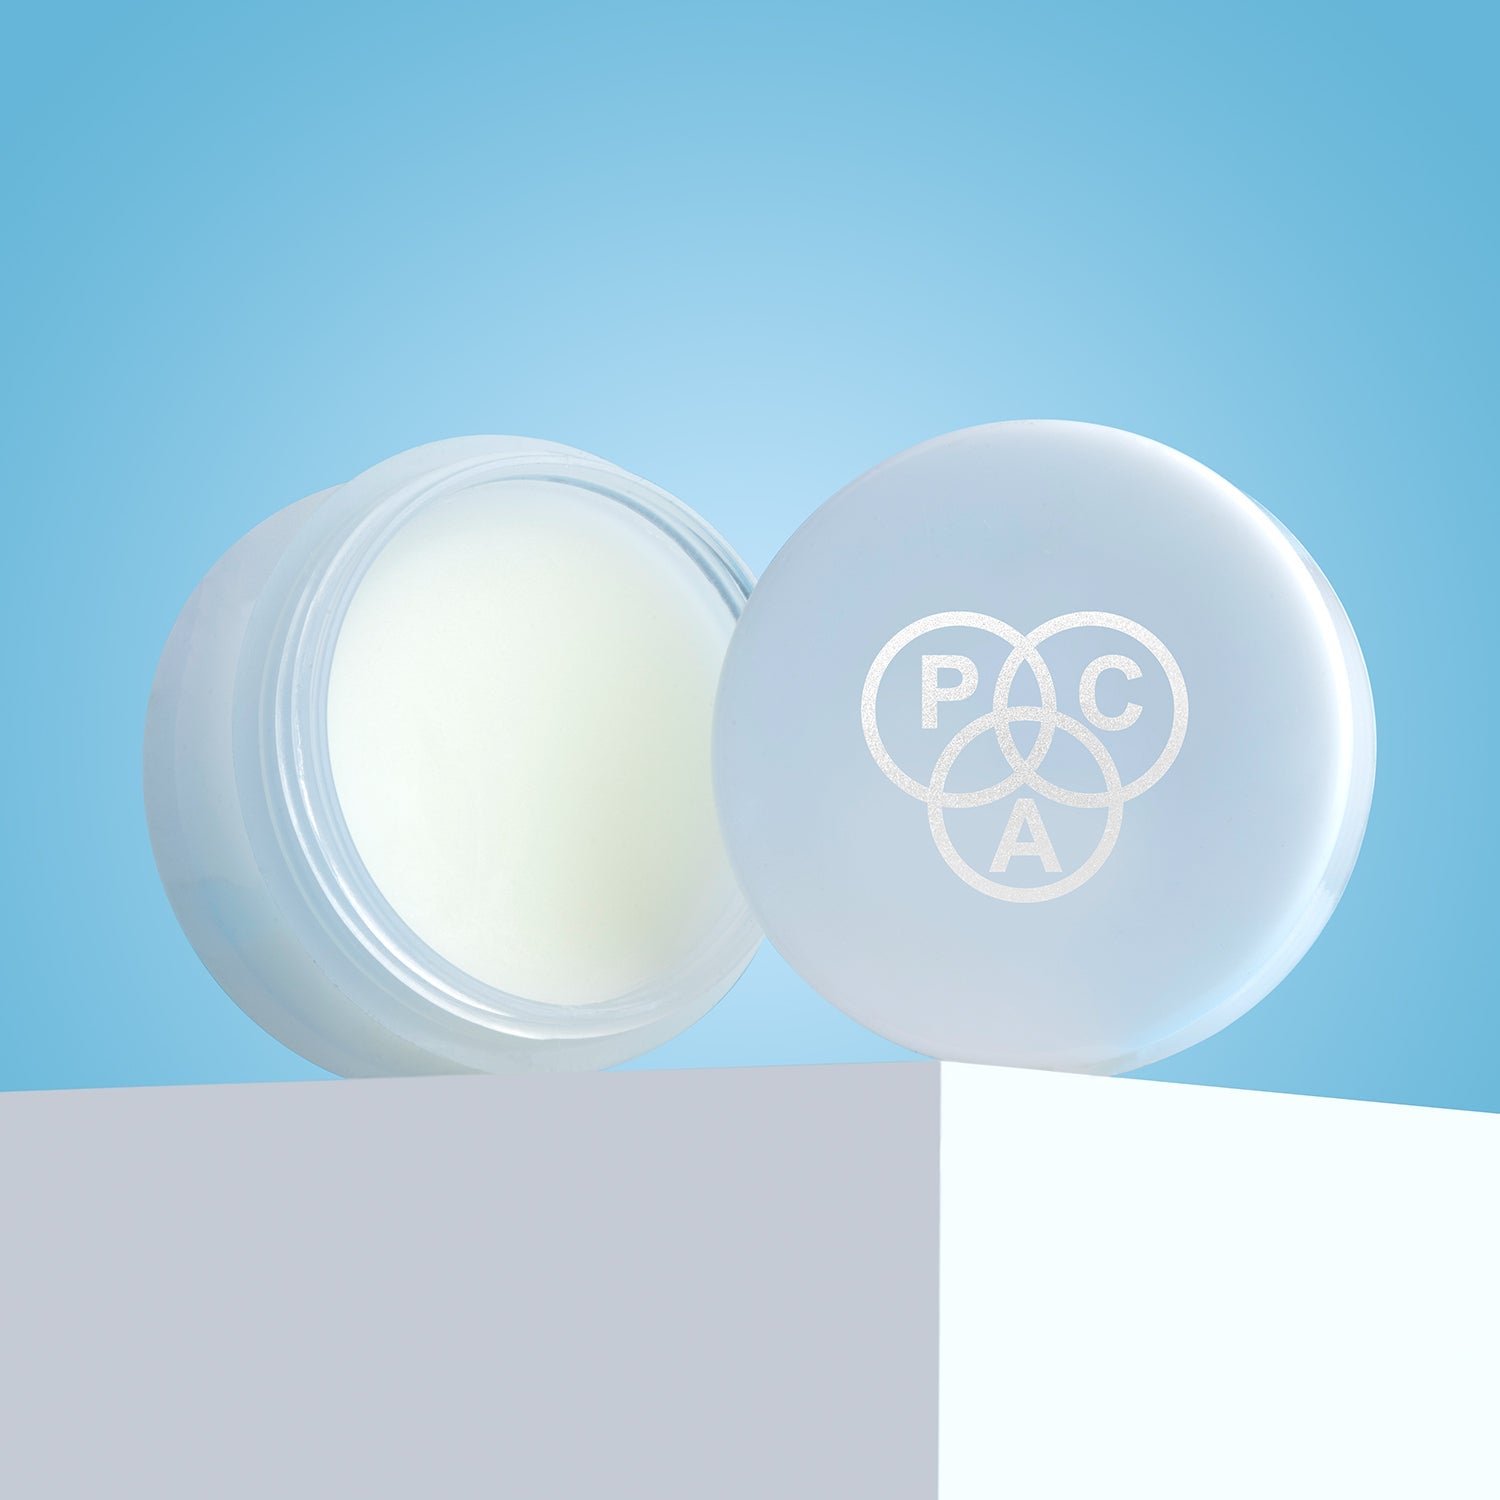 PAC Cosmetics Total Clean Cleansing Balm #Size_10 gm